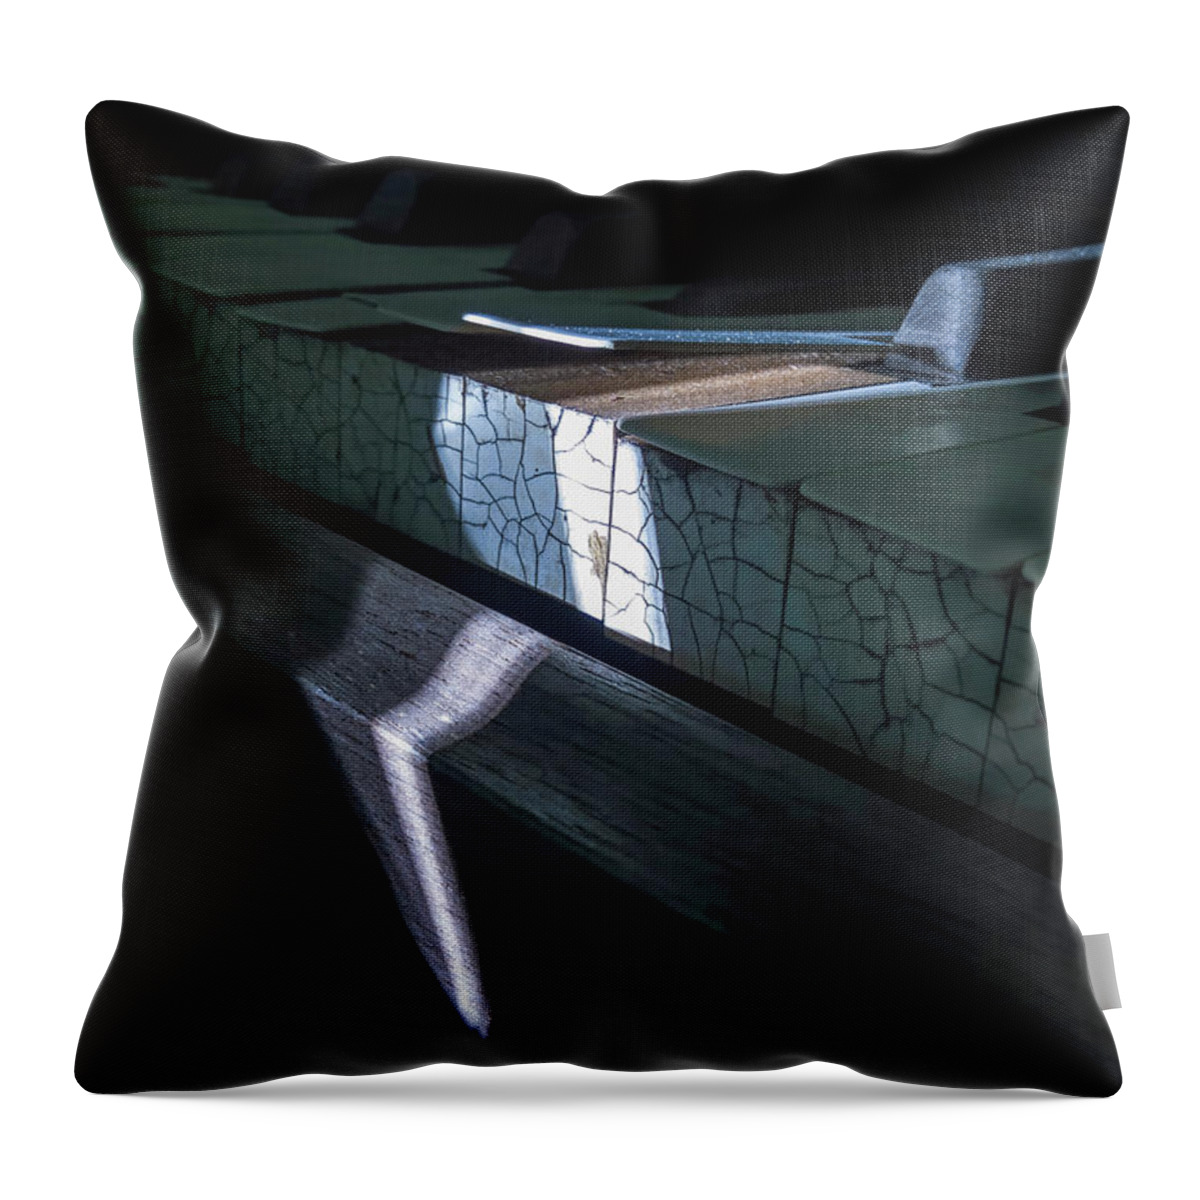 Piano Throw Pillow featuring the photograph Light 1 by Jerry LoFaro